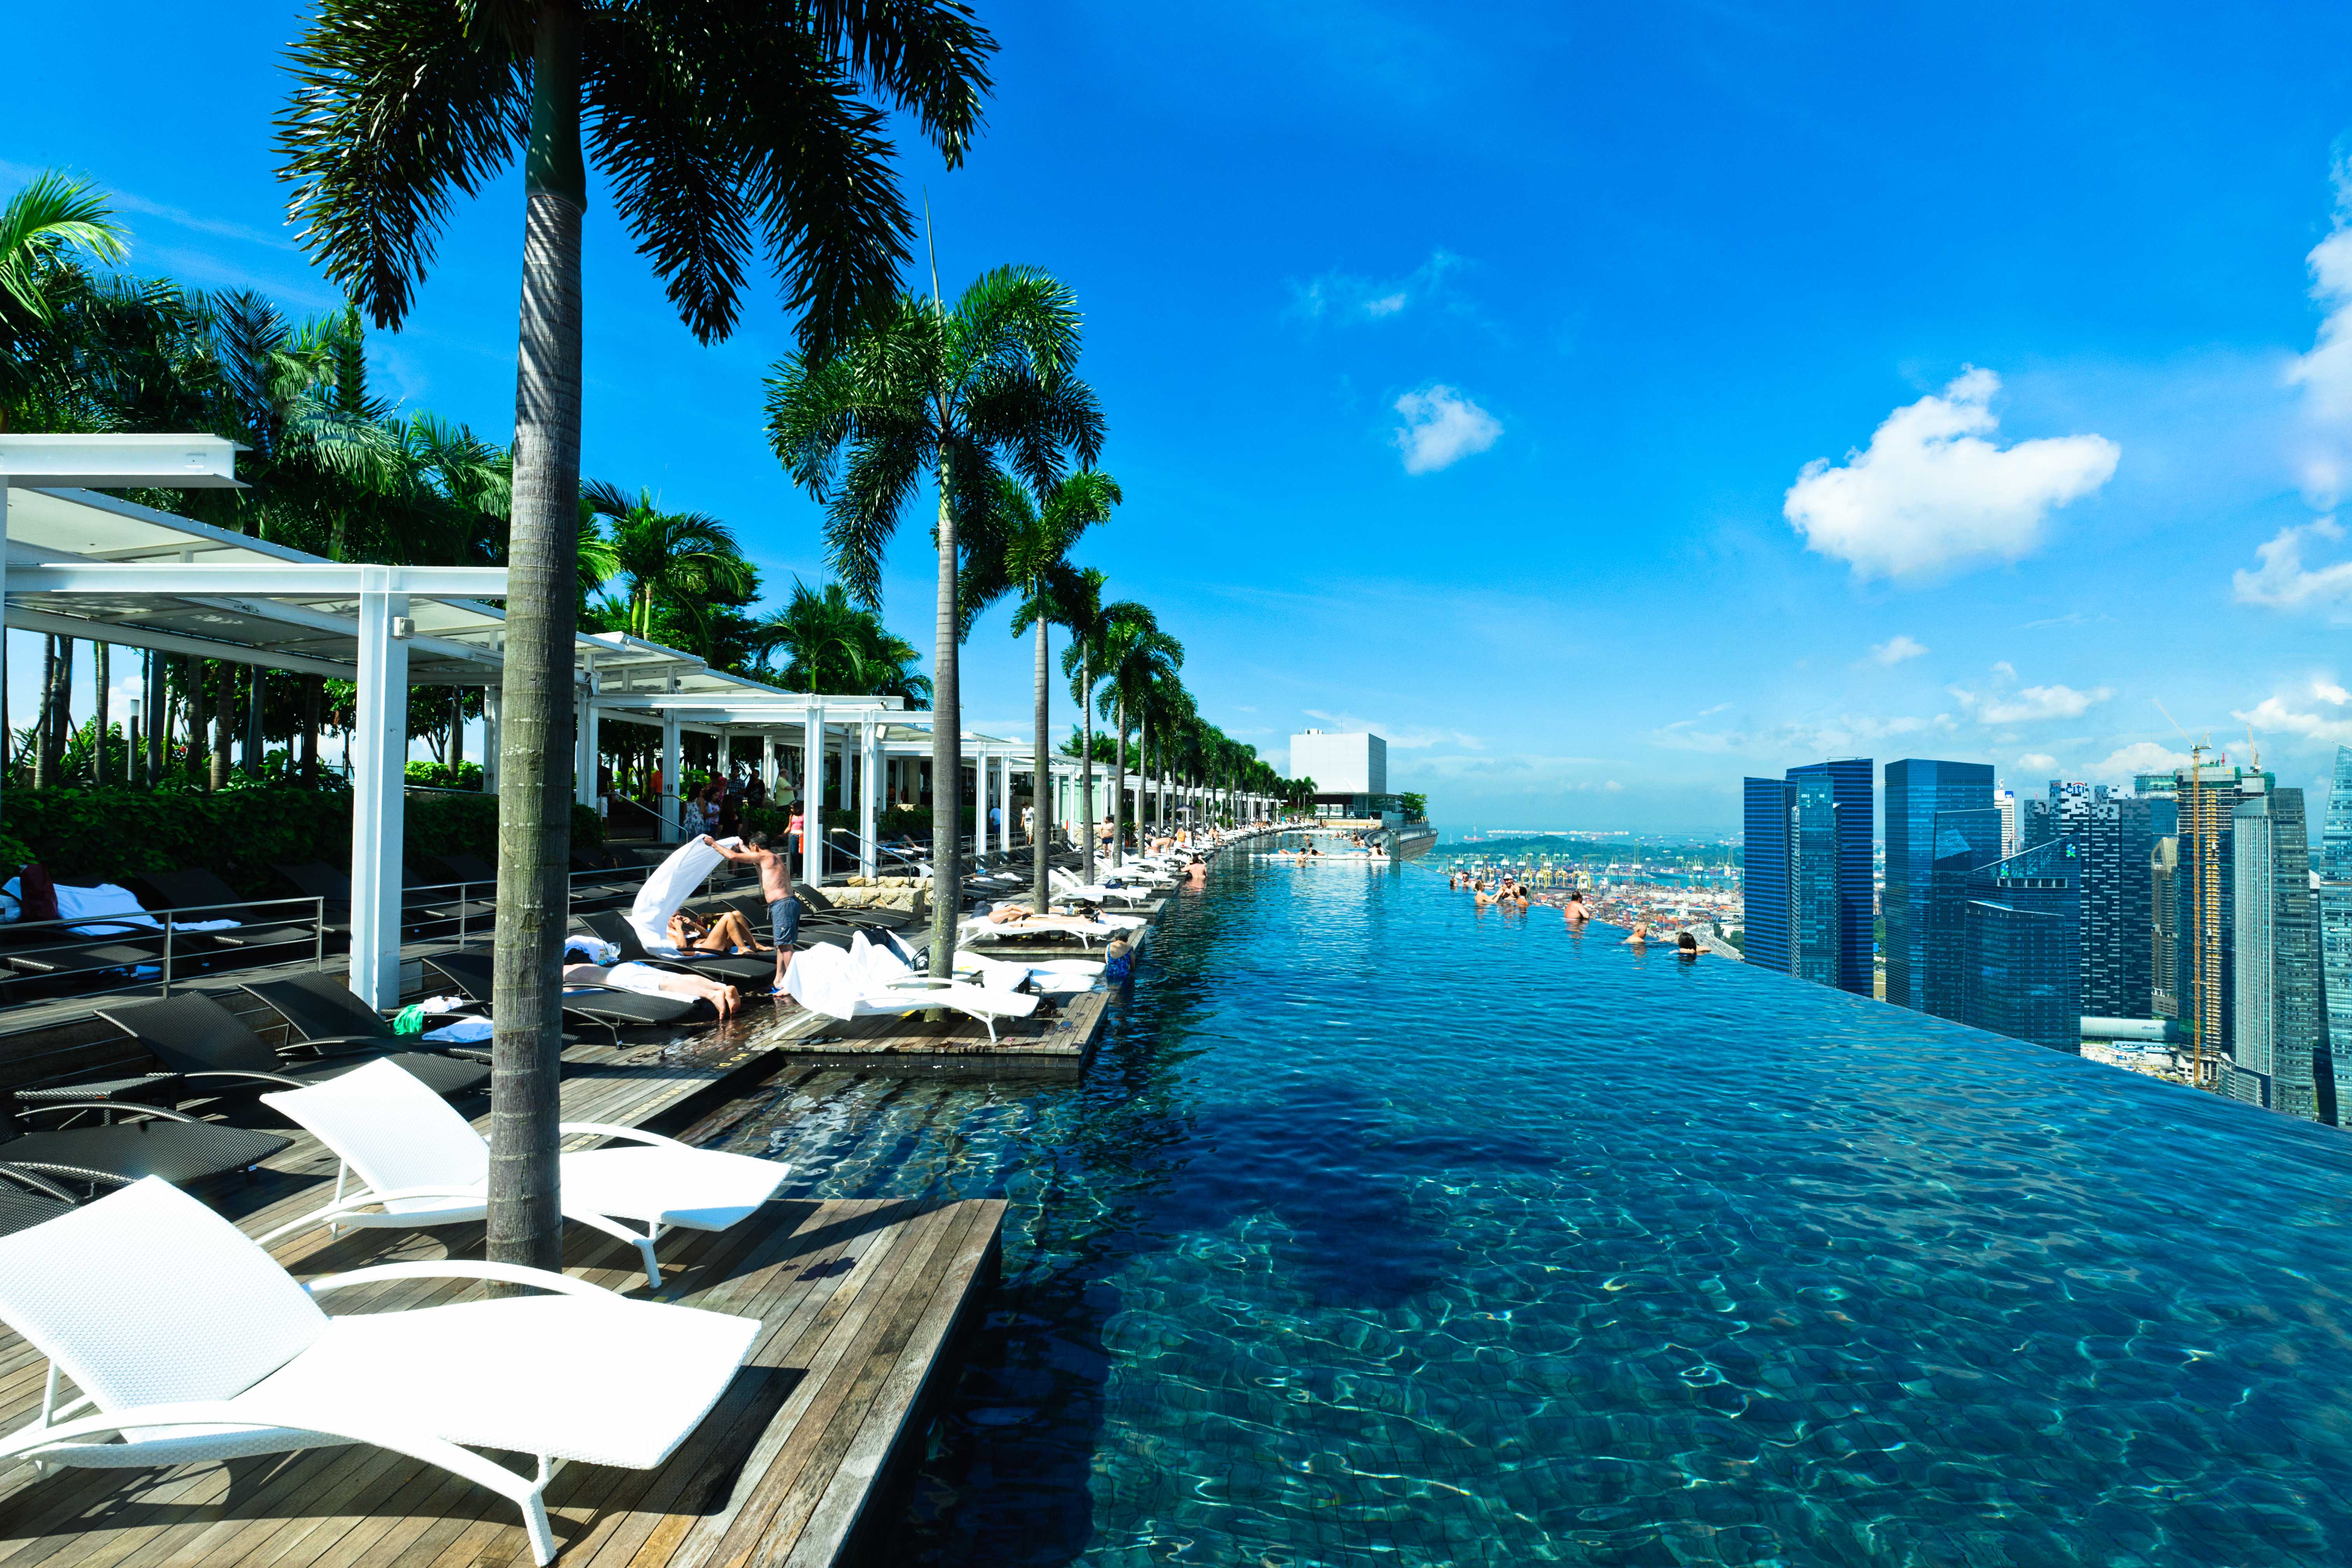 A view of the Infinity Pool at the top of Marina Bay Sands hotel